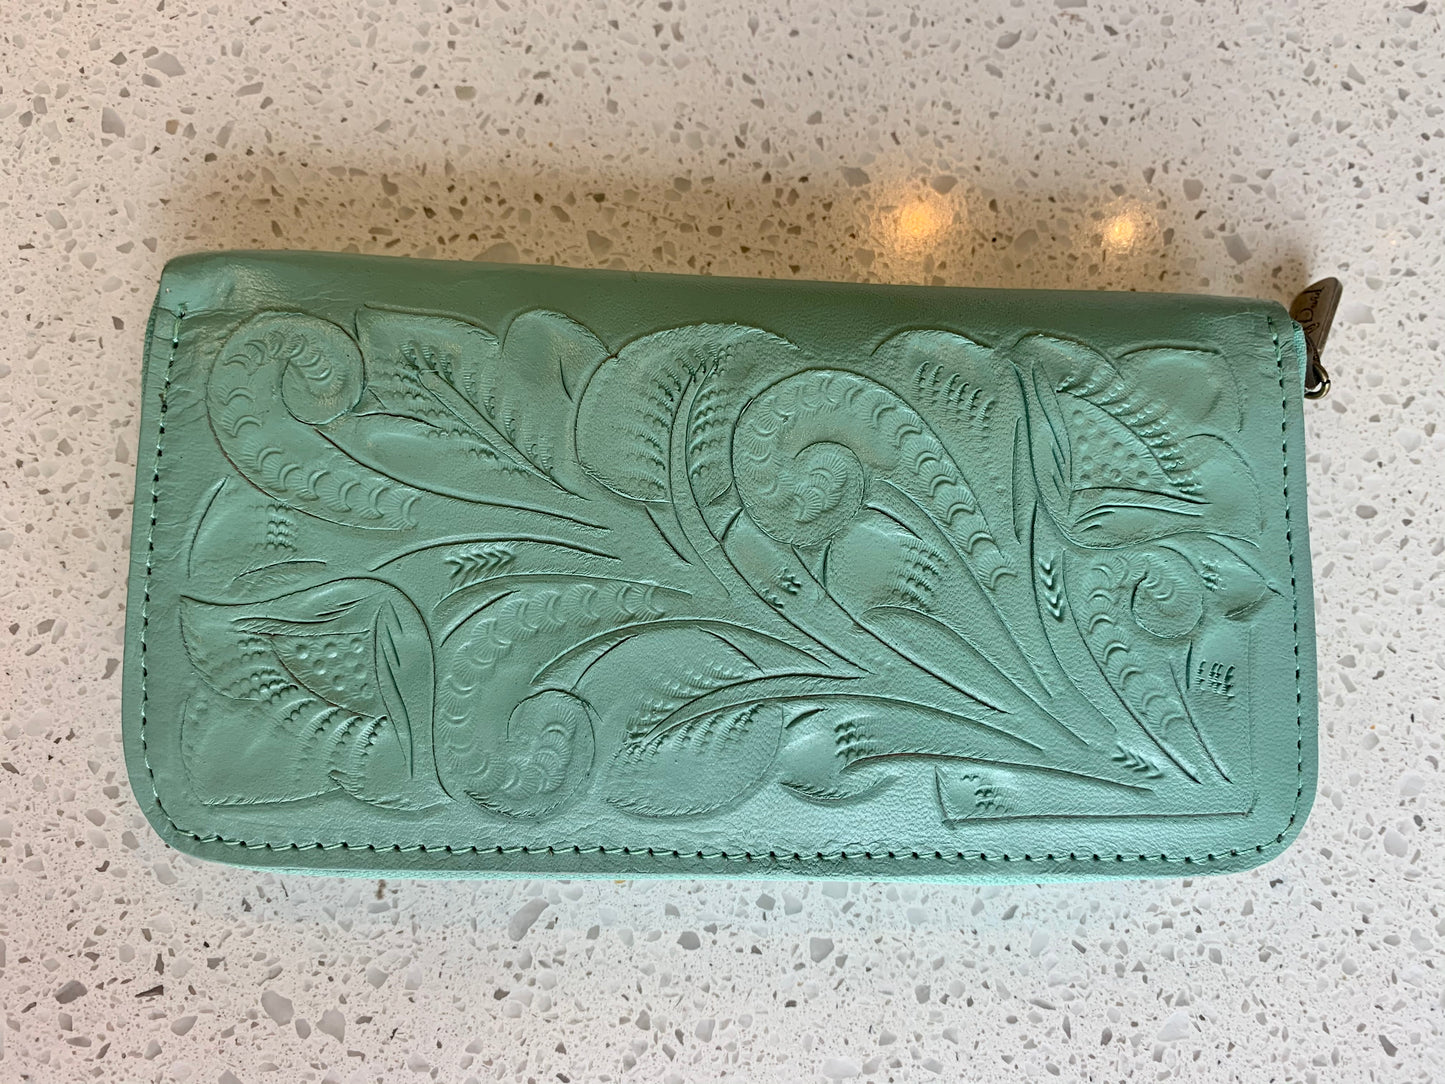 Lolita Hand-Tooled Leather Wallet Wallets Hide and Chic Aqua  